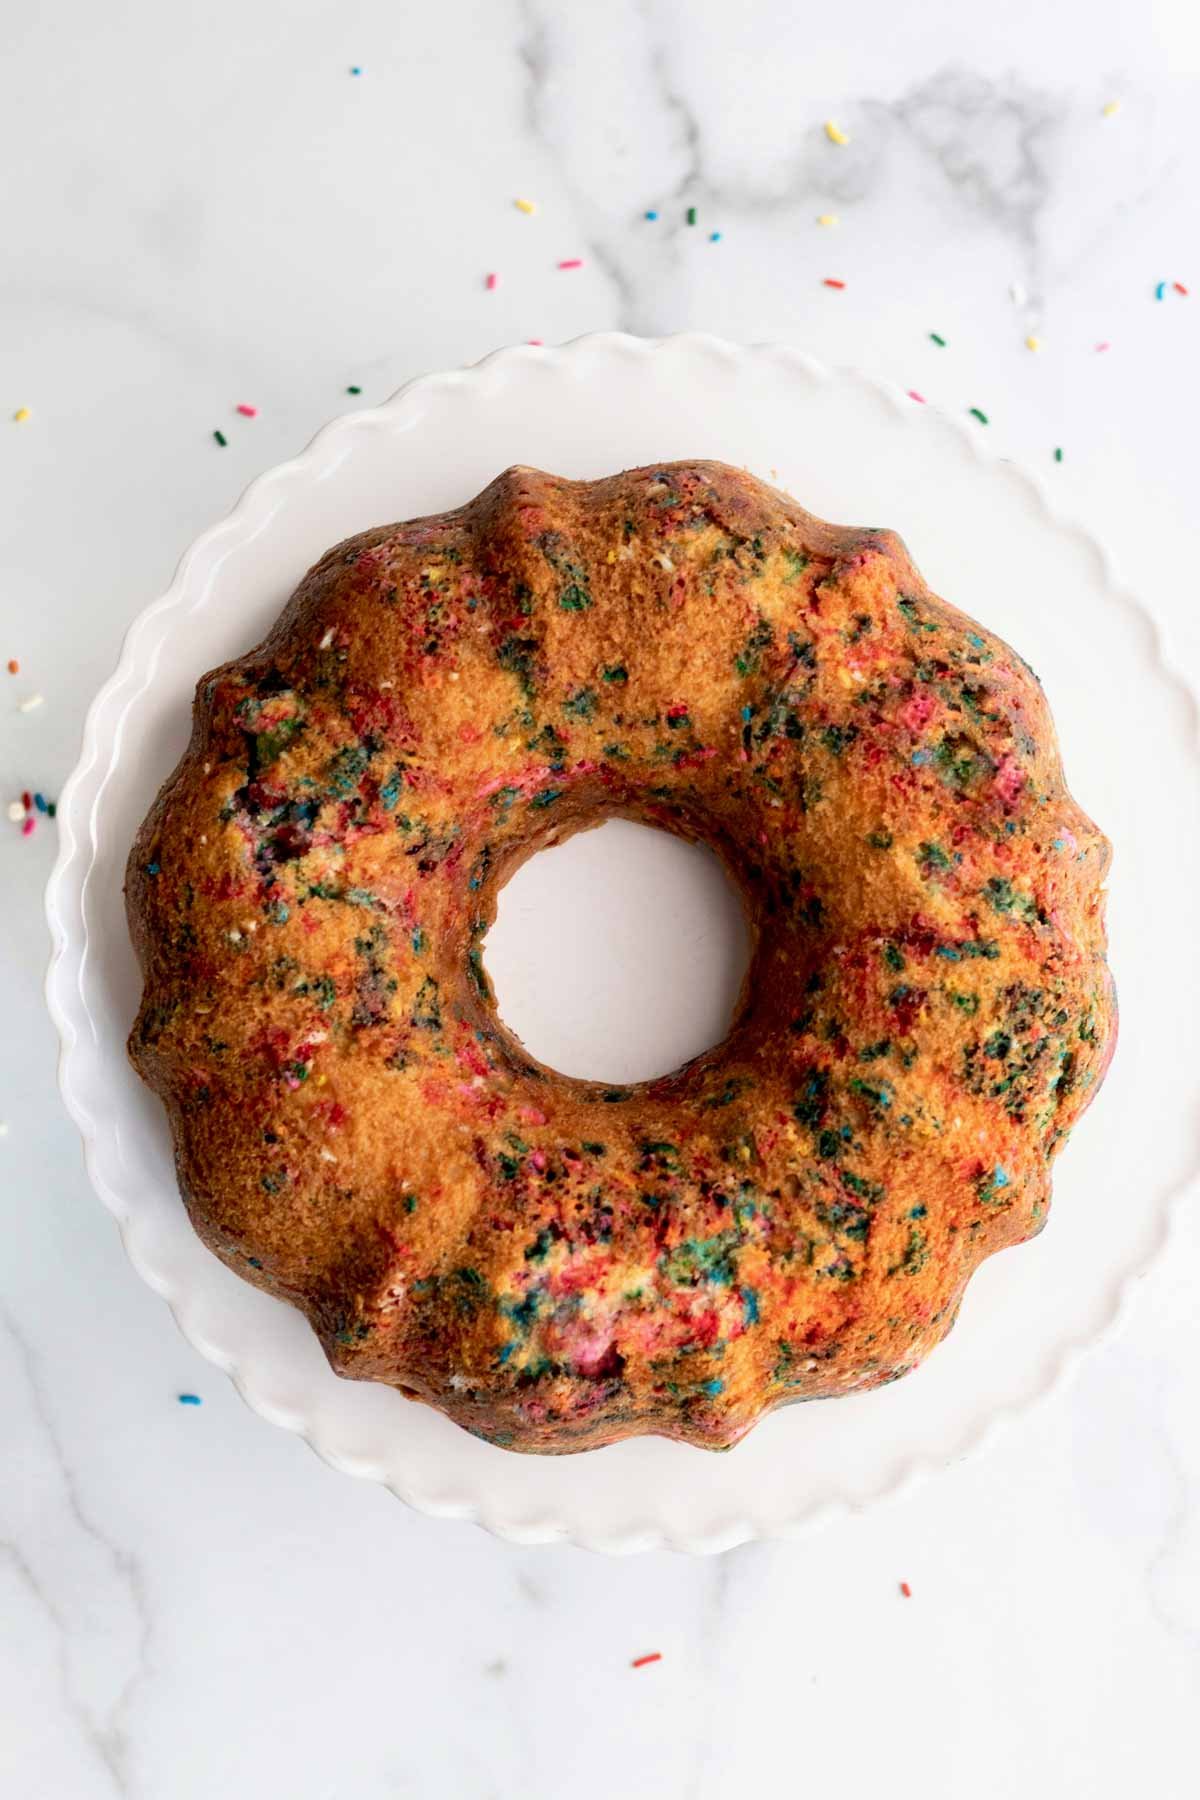 A golden brown bundt cake with rainbow sprinkles.